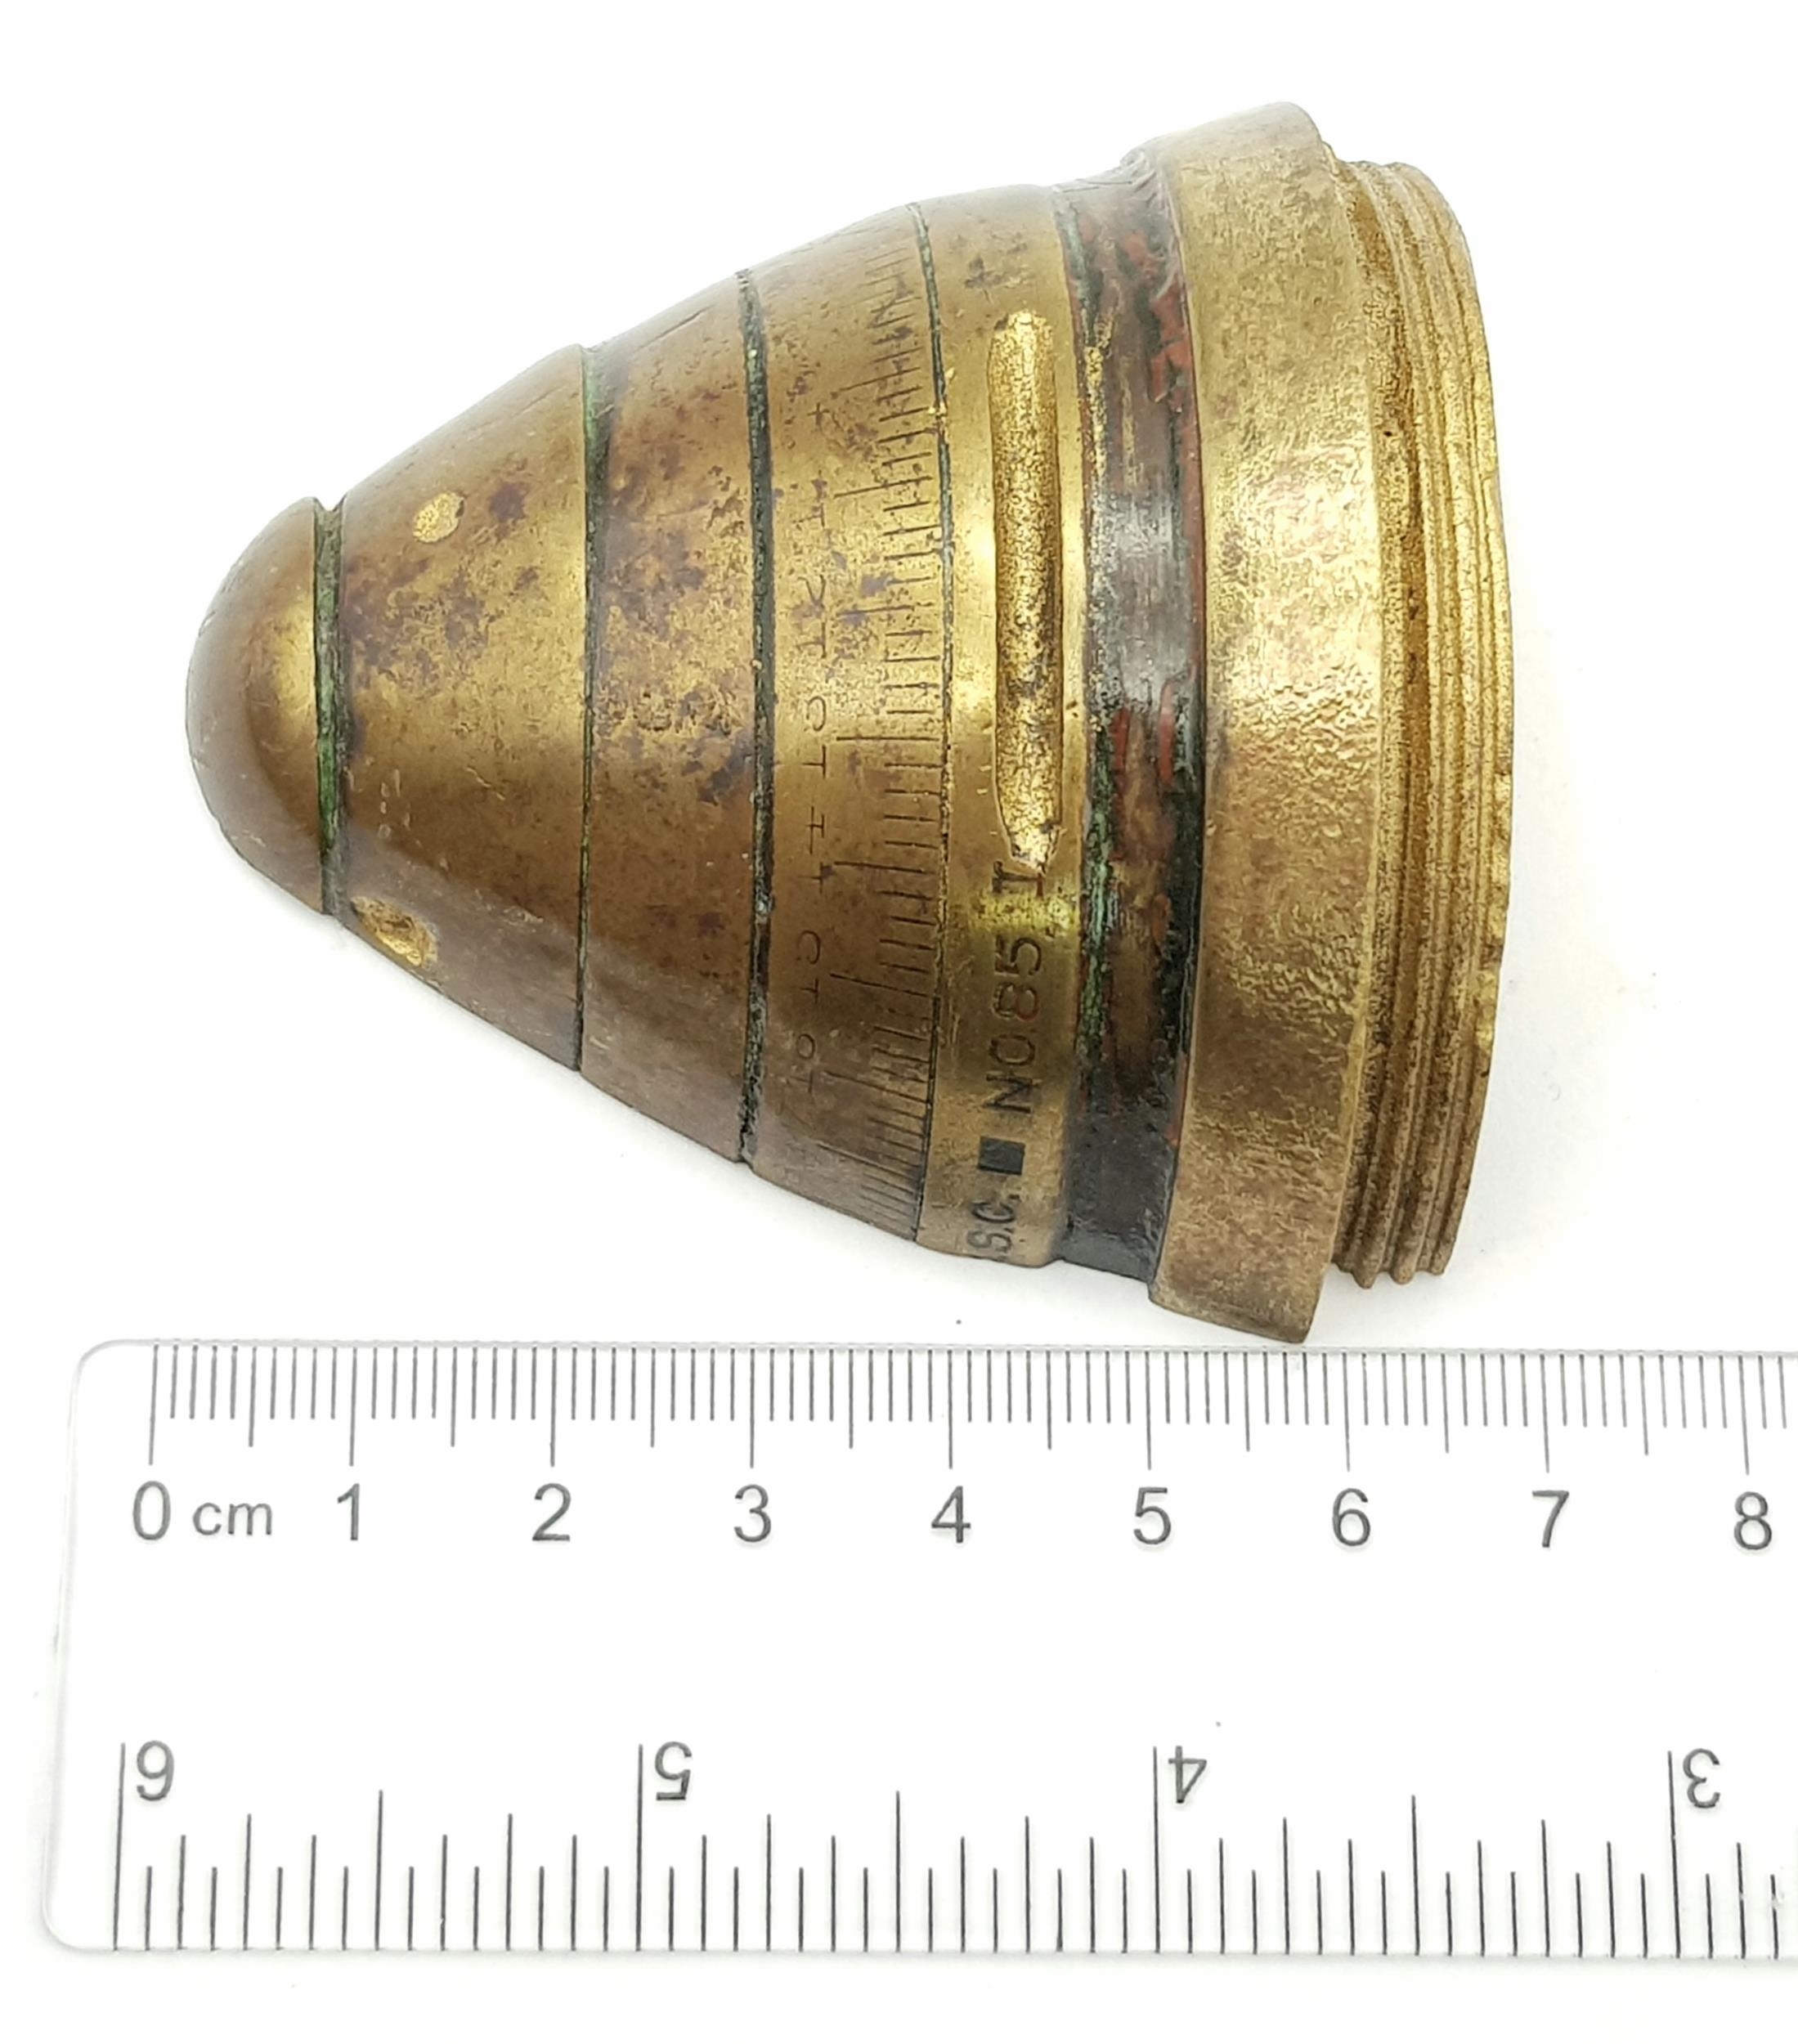 INERT British No 80 Time Fuse. Used on Shrapnel Shells so they would burst in the air, releasing a - Image 3 of 5